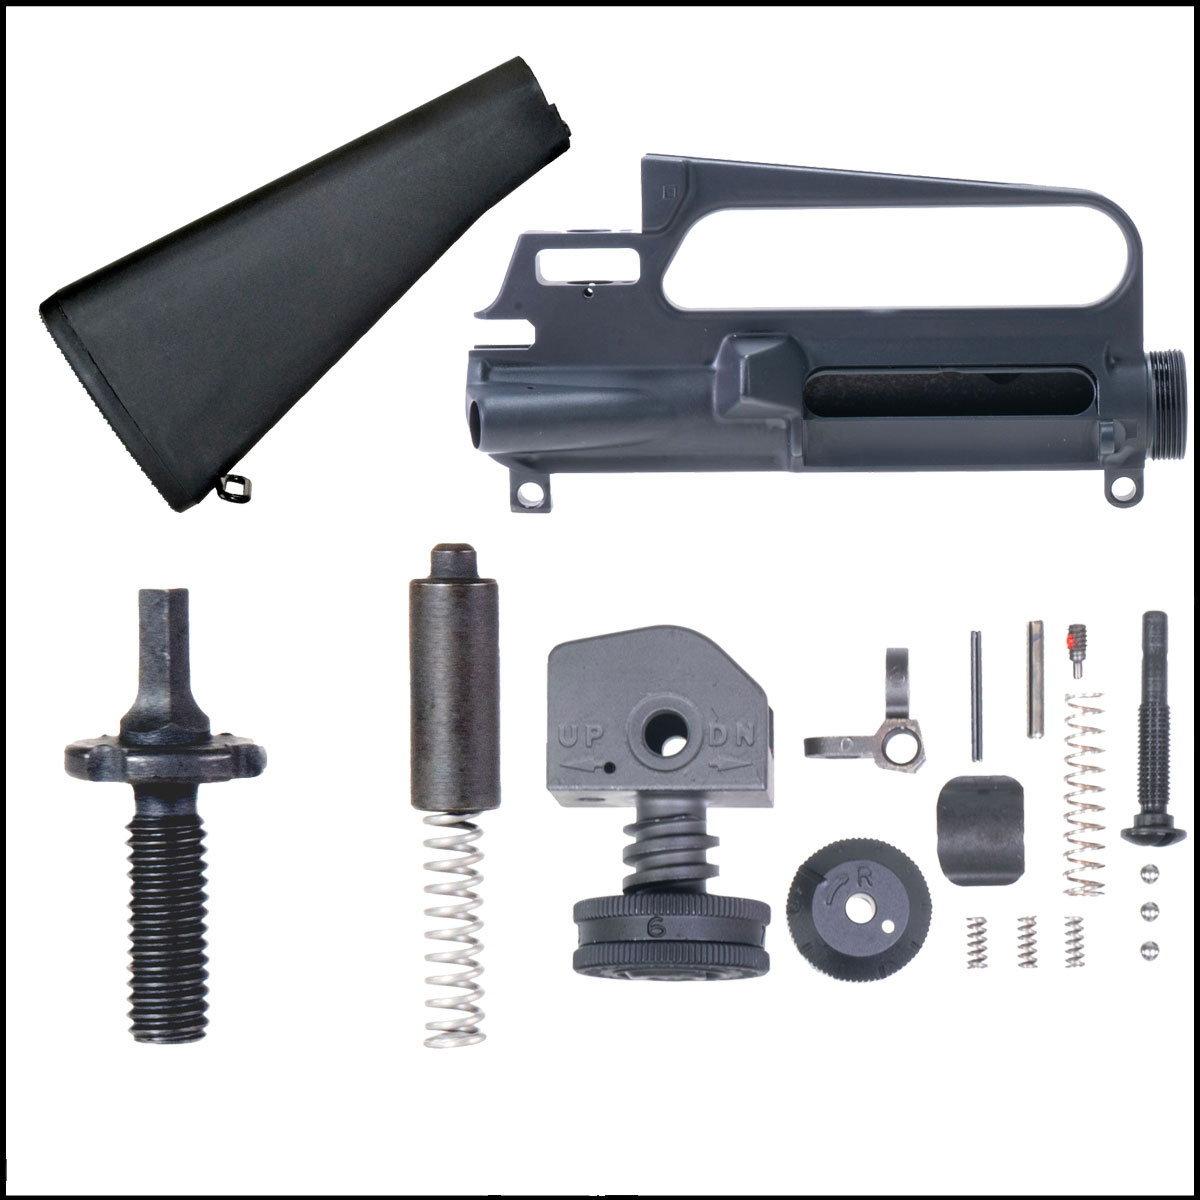 A2 Starter Kit: Gauntlet Arms A2 Front Sight Post Kit, USA Made, Steel  + Luth-AR LUTH-AR A2 Rear Sight Assembly/Kit  + Omega Manufacturing A2 Style AR Fixed Stock  + Davidson Defense A2 Upper Receiver